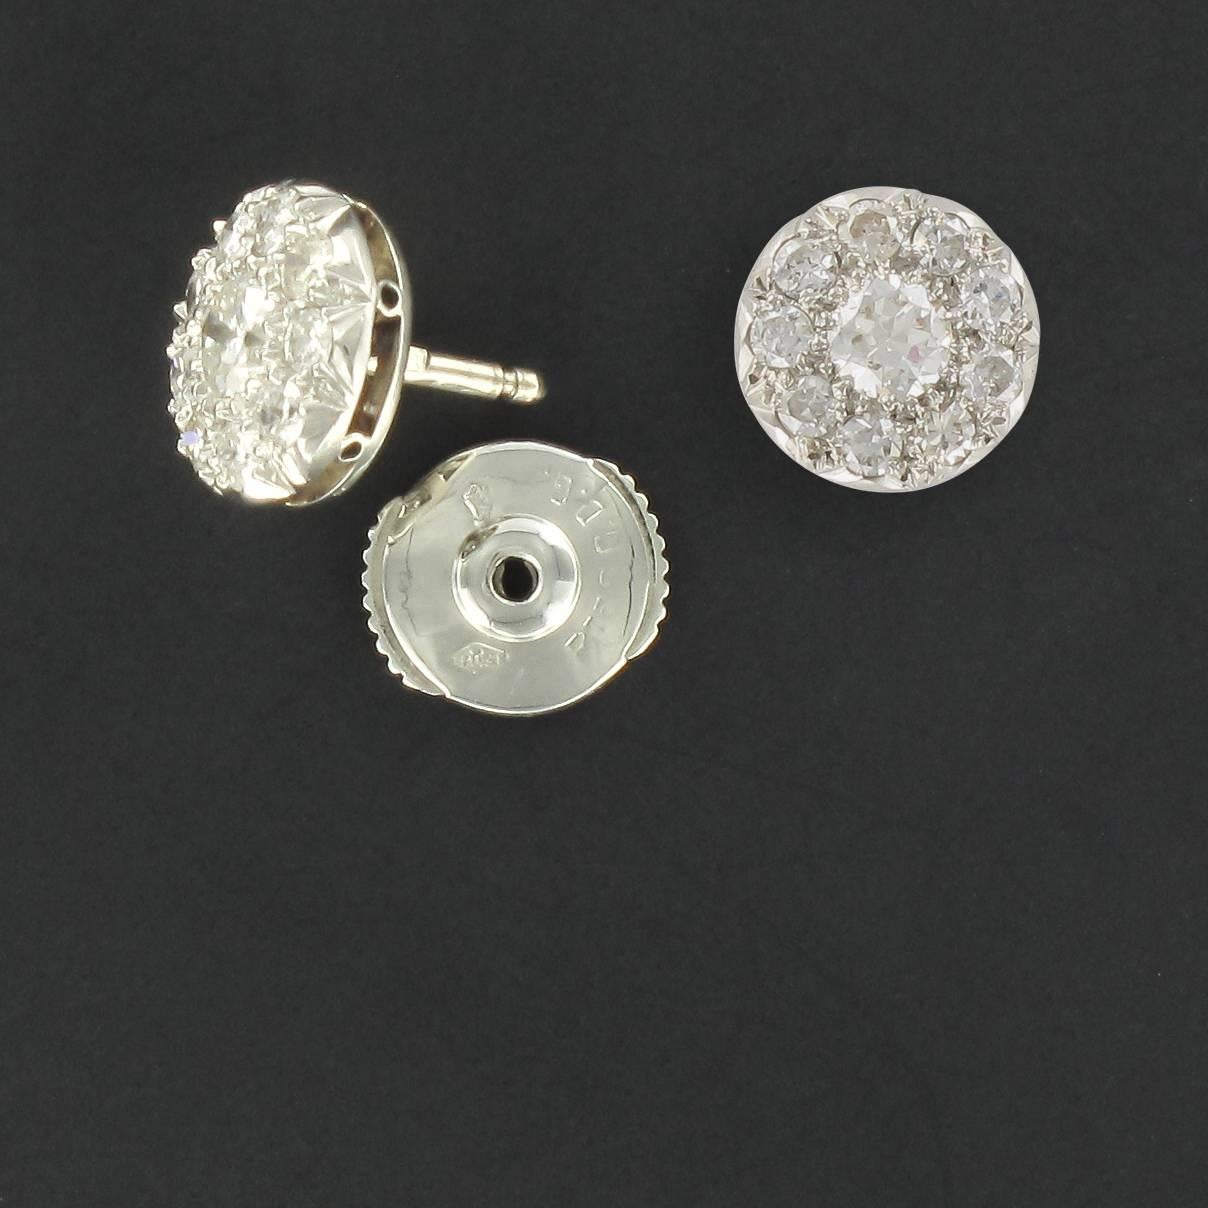 Earrings in 18 carat white gold, eagle head hallmark.

Each round white gold stud earring is set with 10 modern brilliant cut diamonds. The central diamond of each is the largest. They feature Alpa clasps at the back. 

Total diamond weight: about